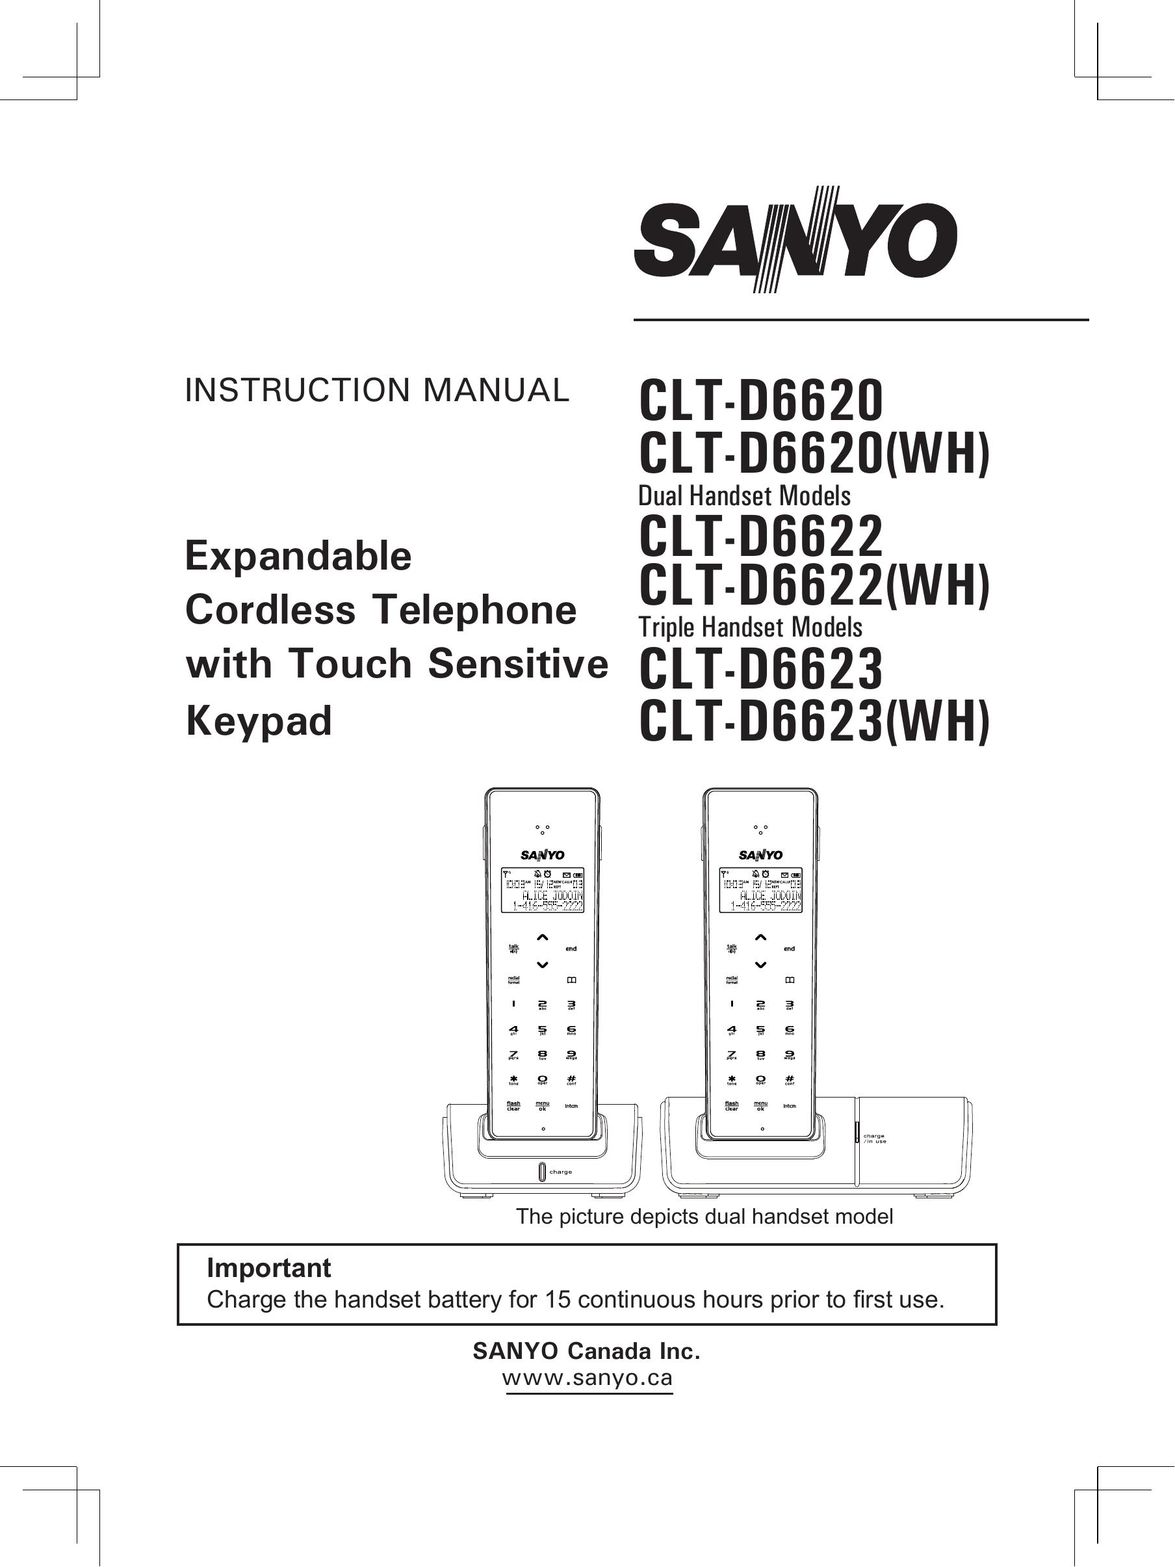 Sanyo CLT-D6623(WH) Cordless Telephone User Manual